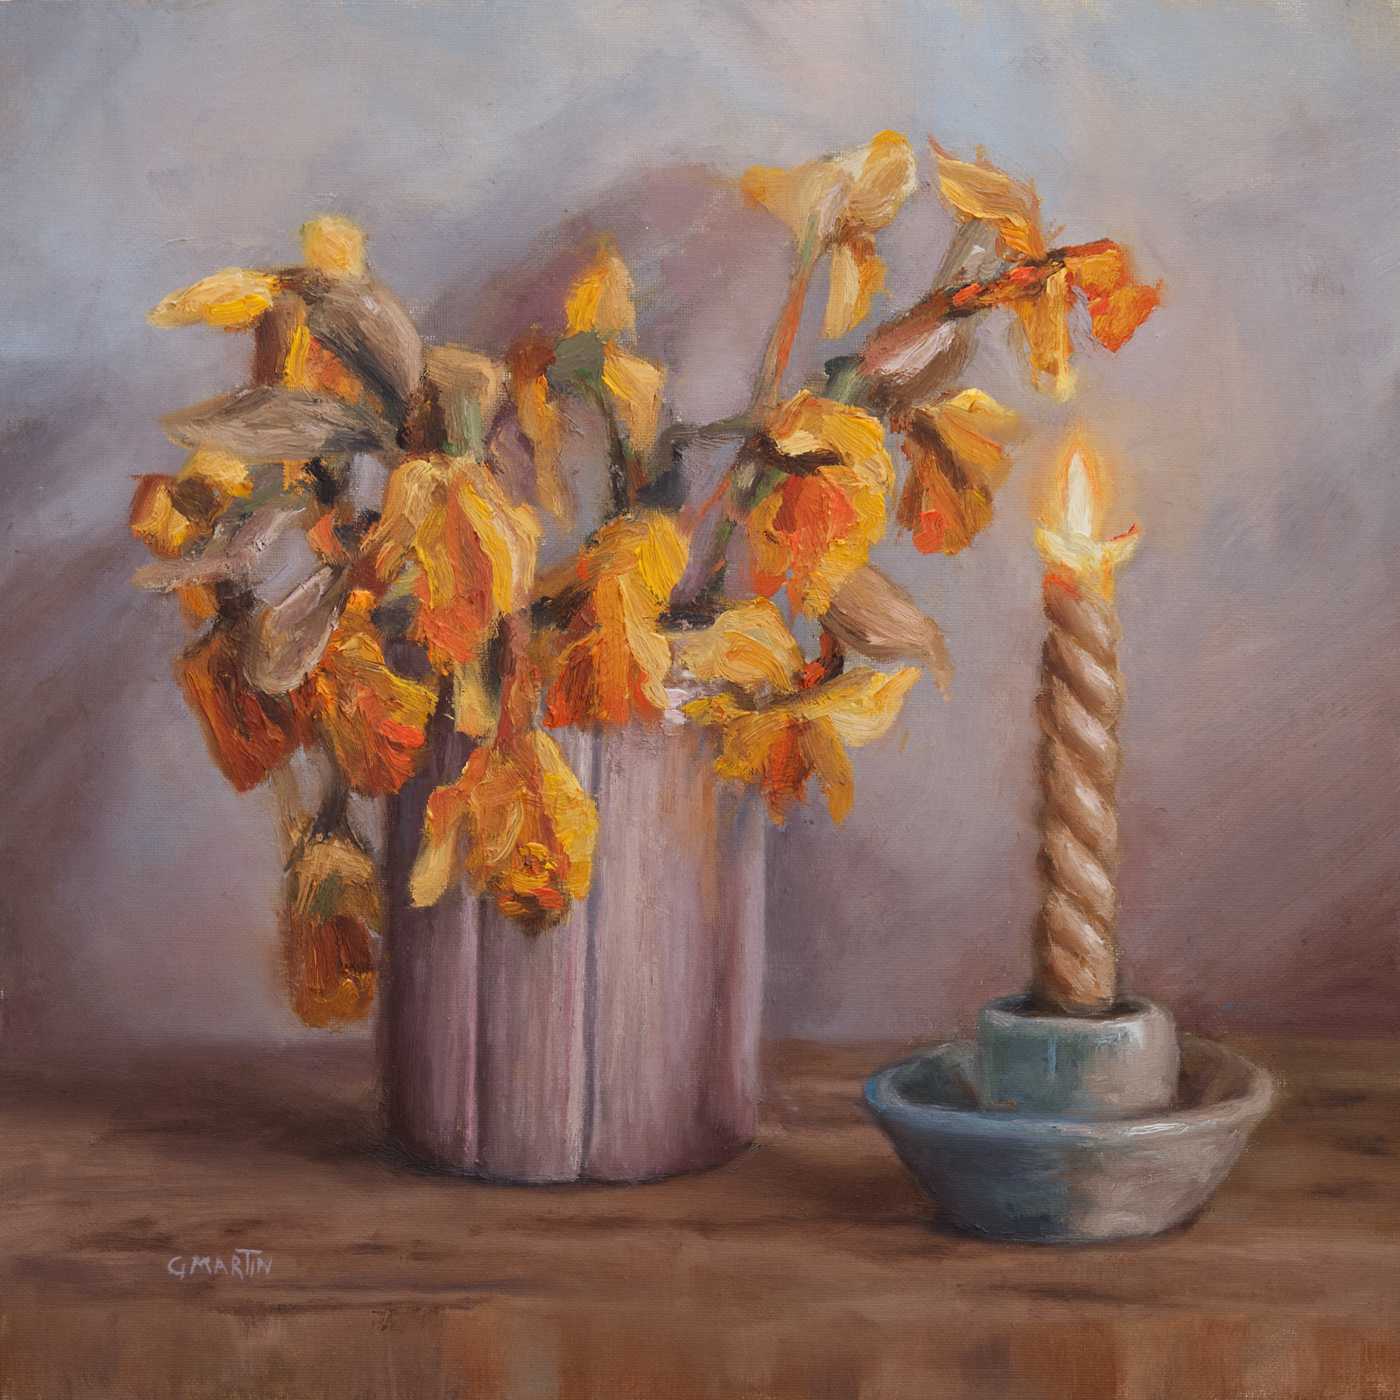 Oil painting of wilted Daffodils in a vase next to a candle burning bright